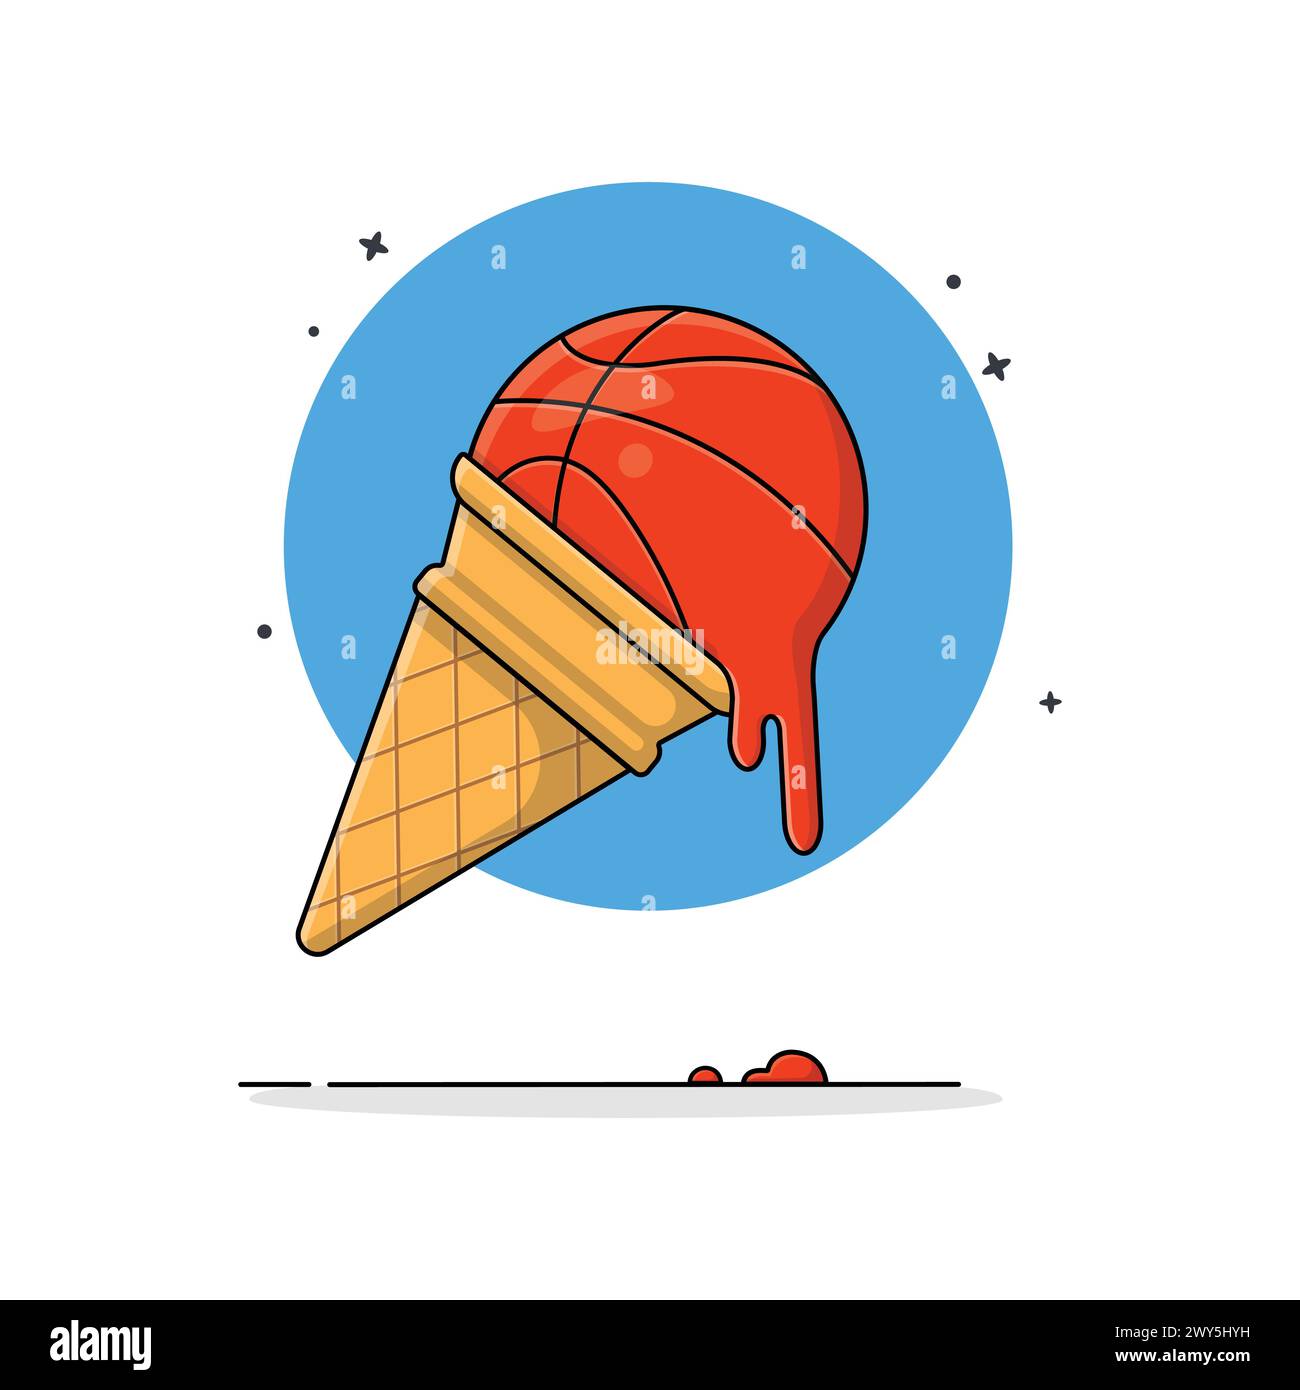 Melting Basketball Cone Ice Cream Vector Illustration. Food Object Concept Design Stock Vector